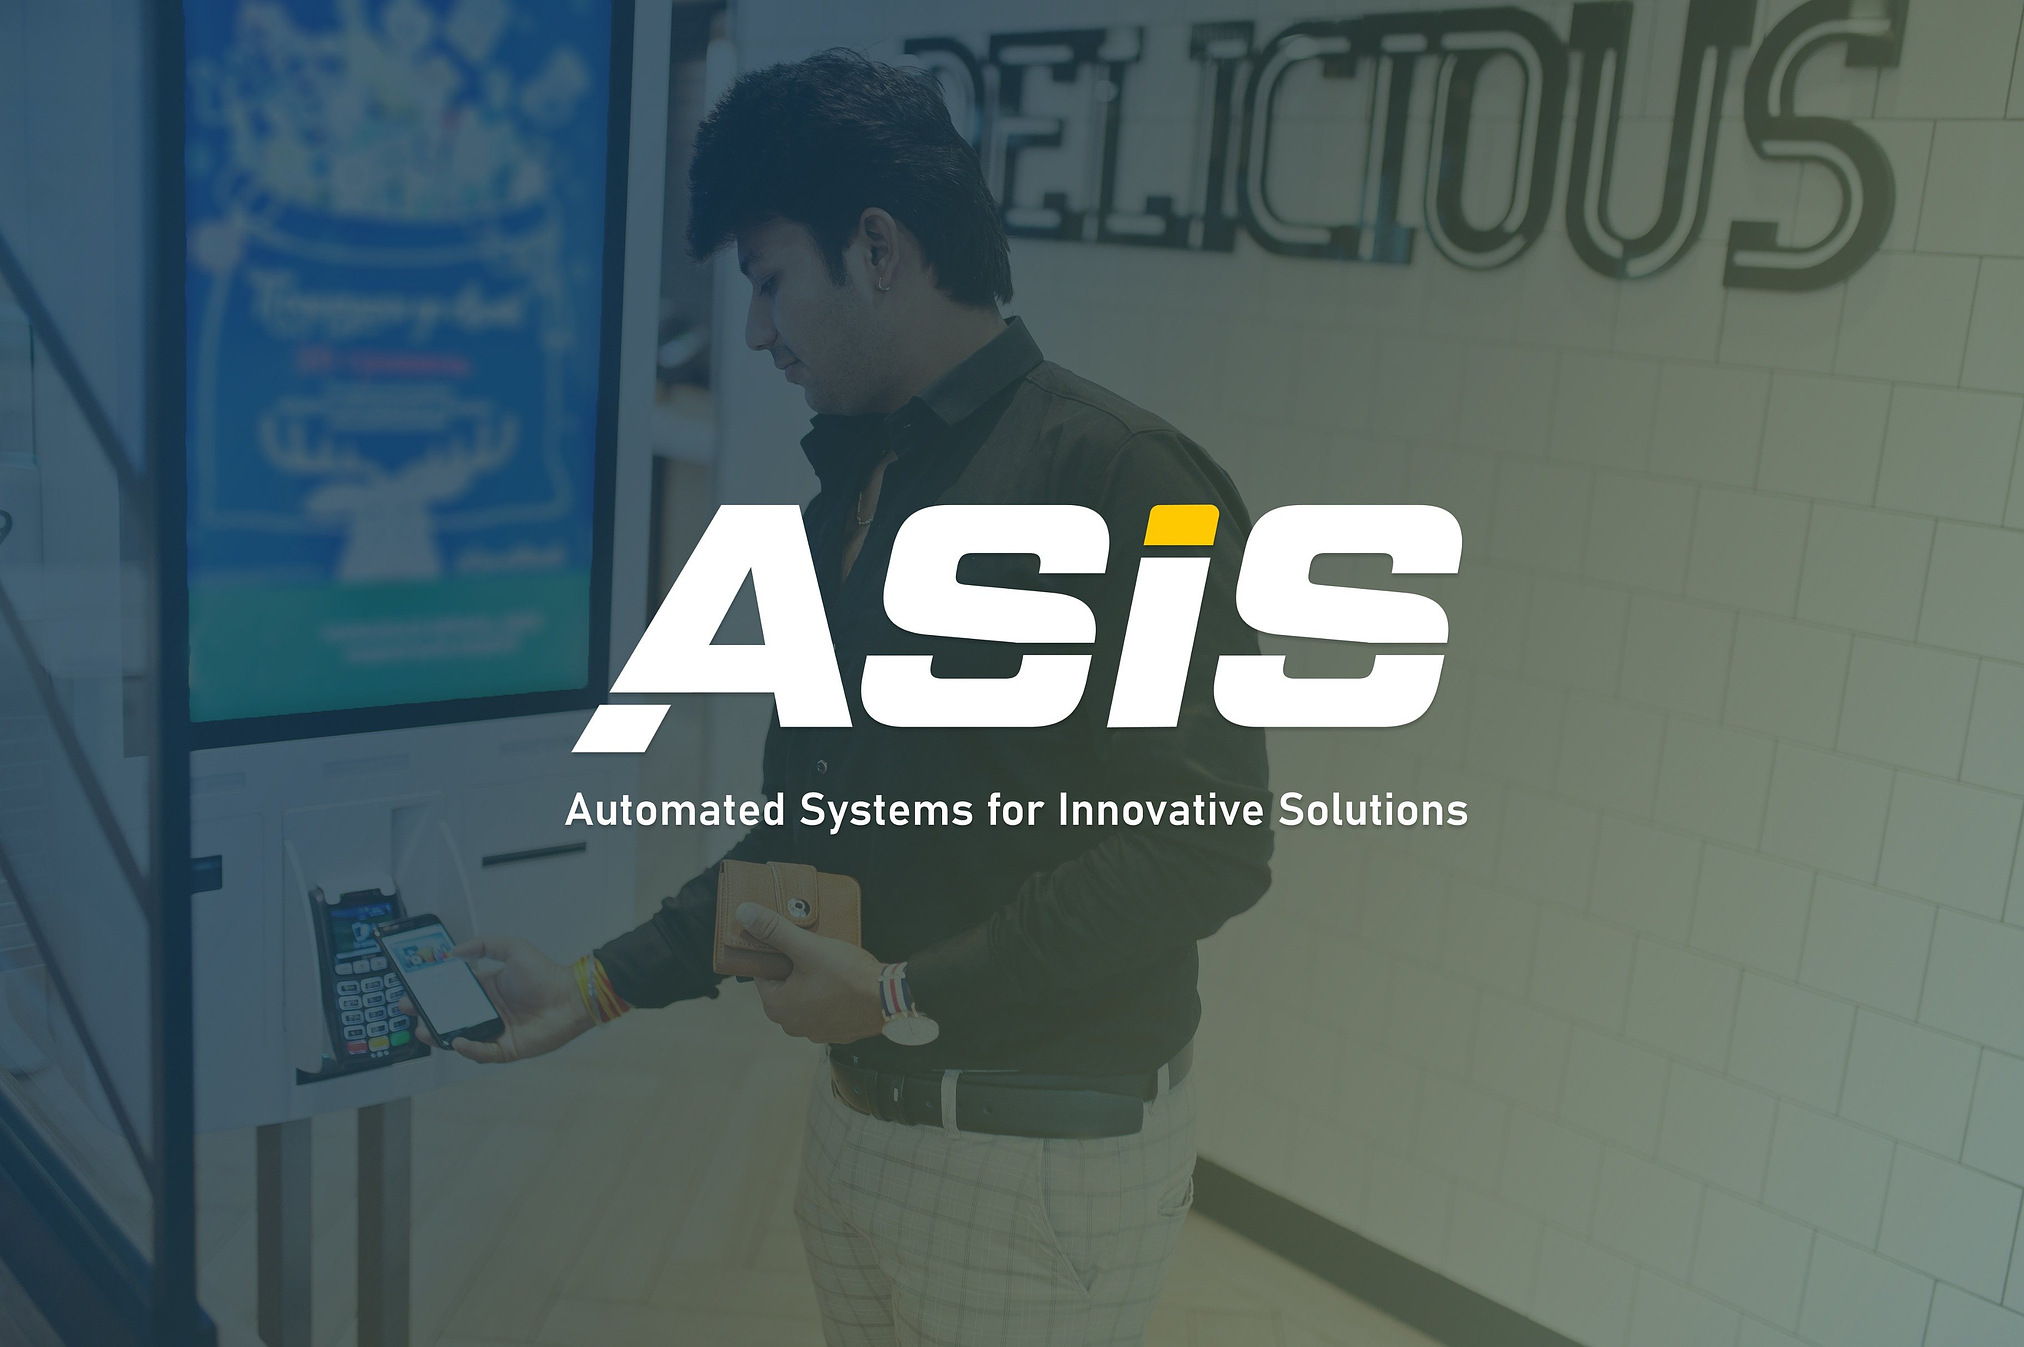 Automated systems for innovative solutions